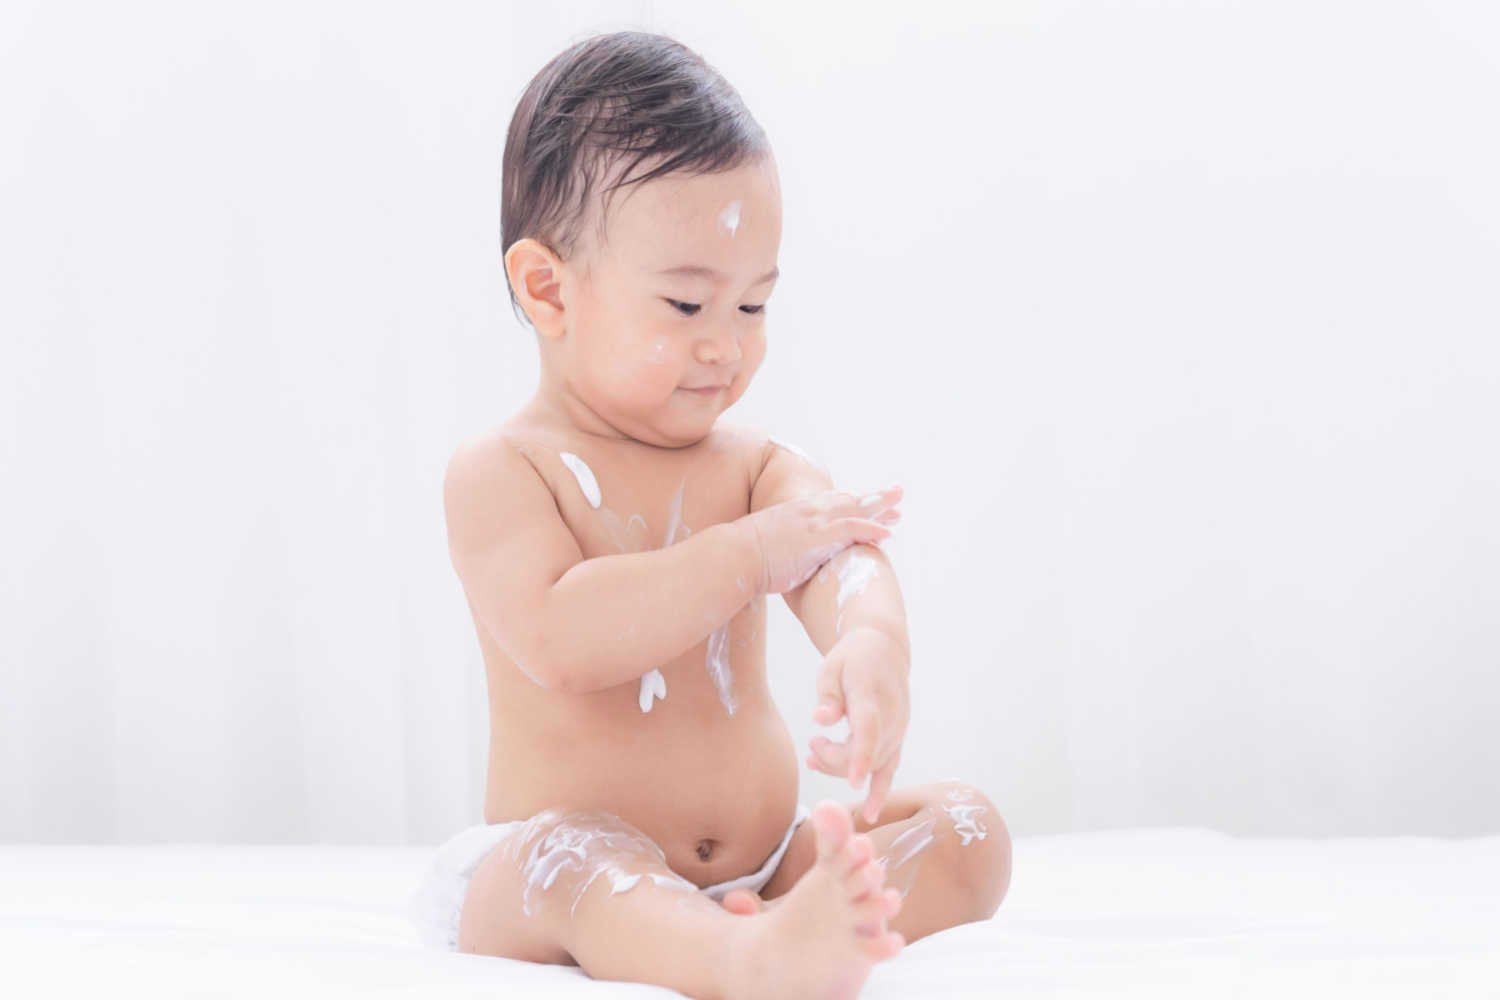 Benefits of Using Moisturizer For Your Baby